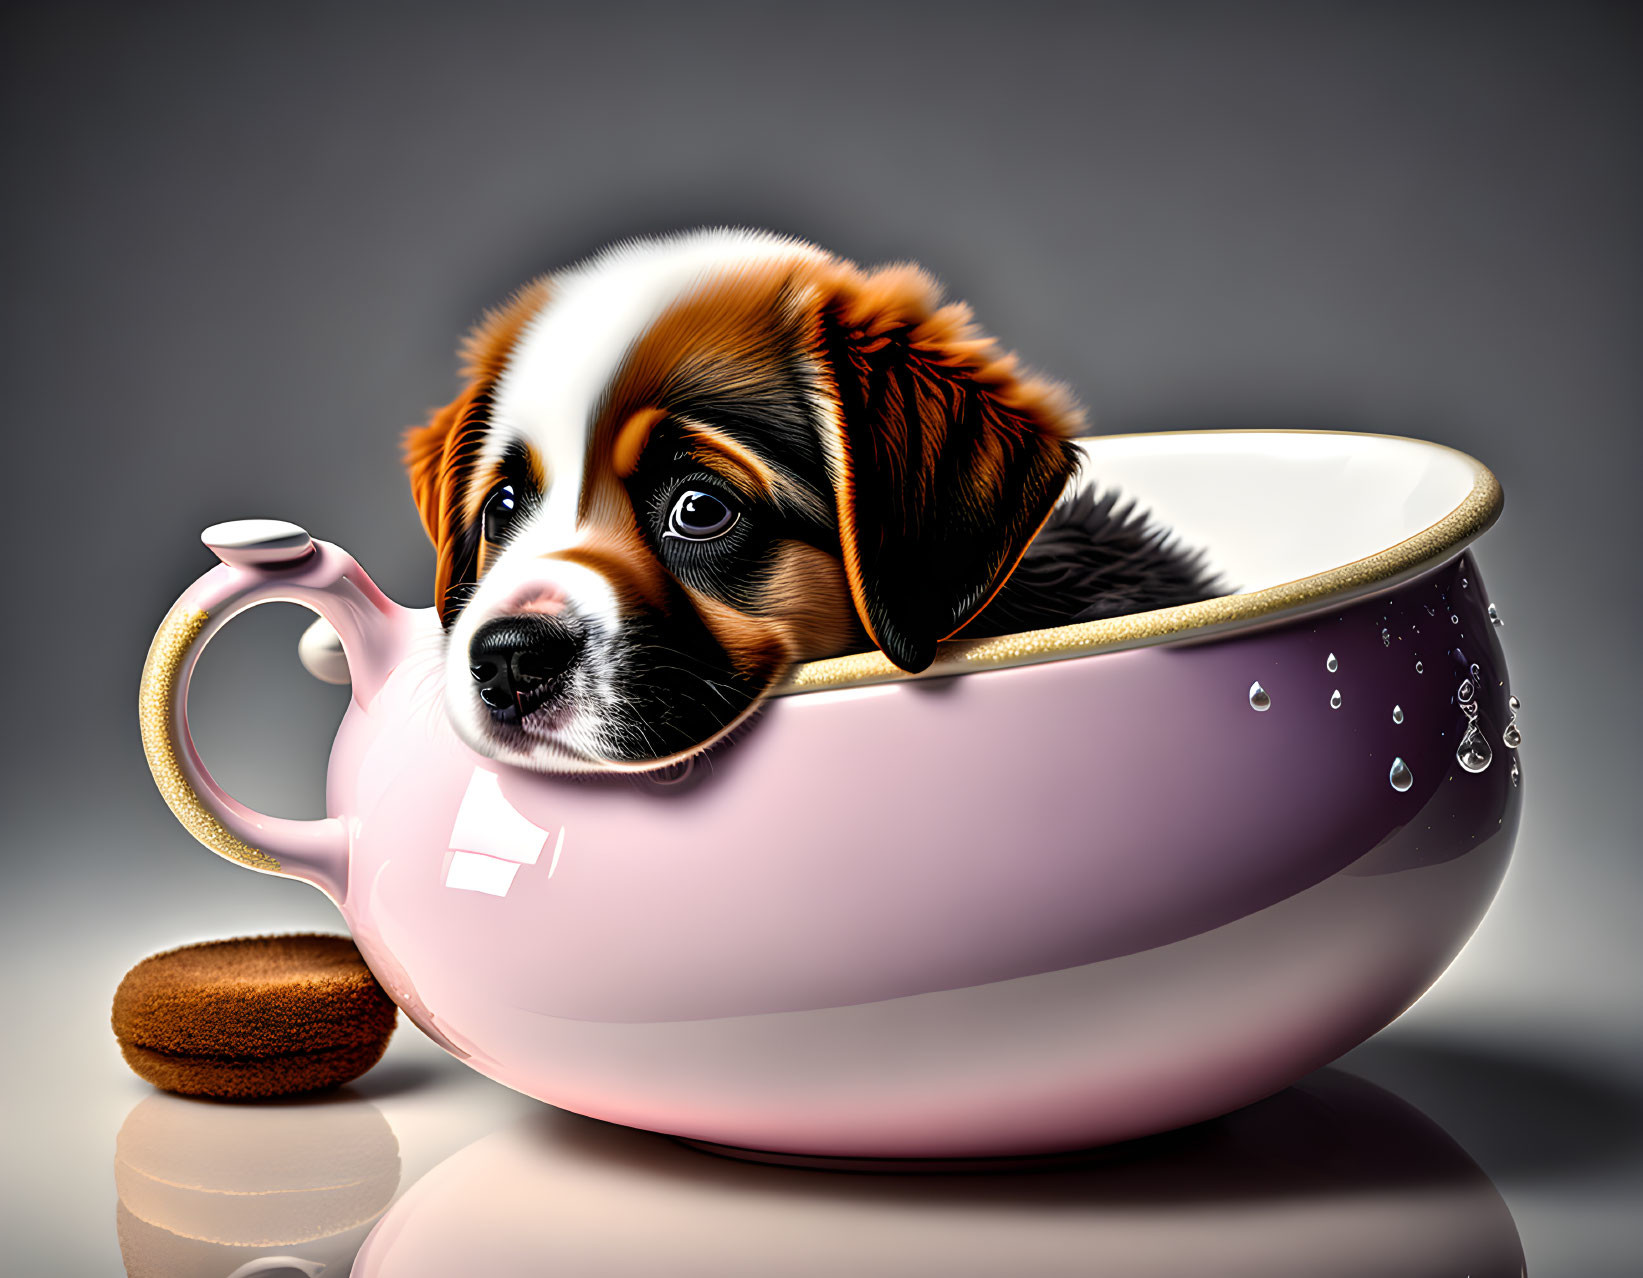 Puppy in a Cup